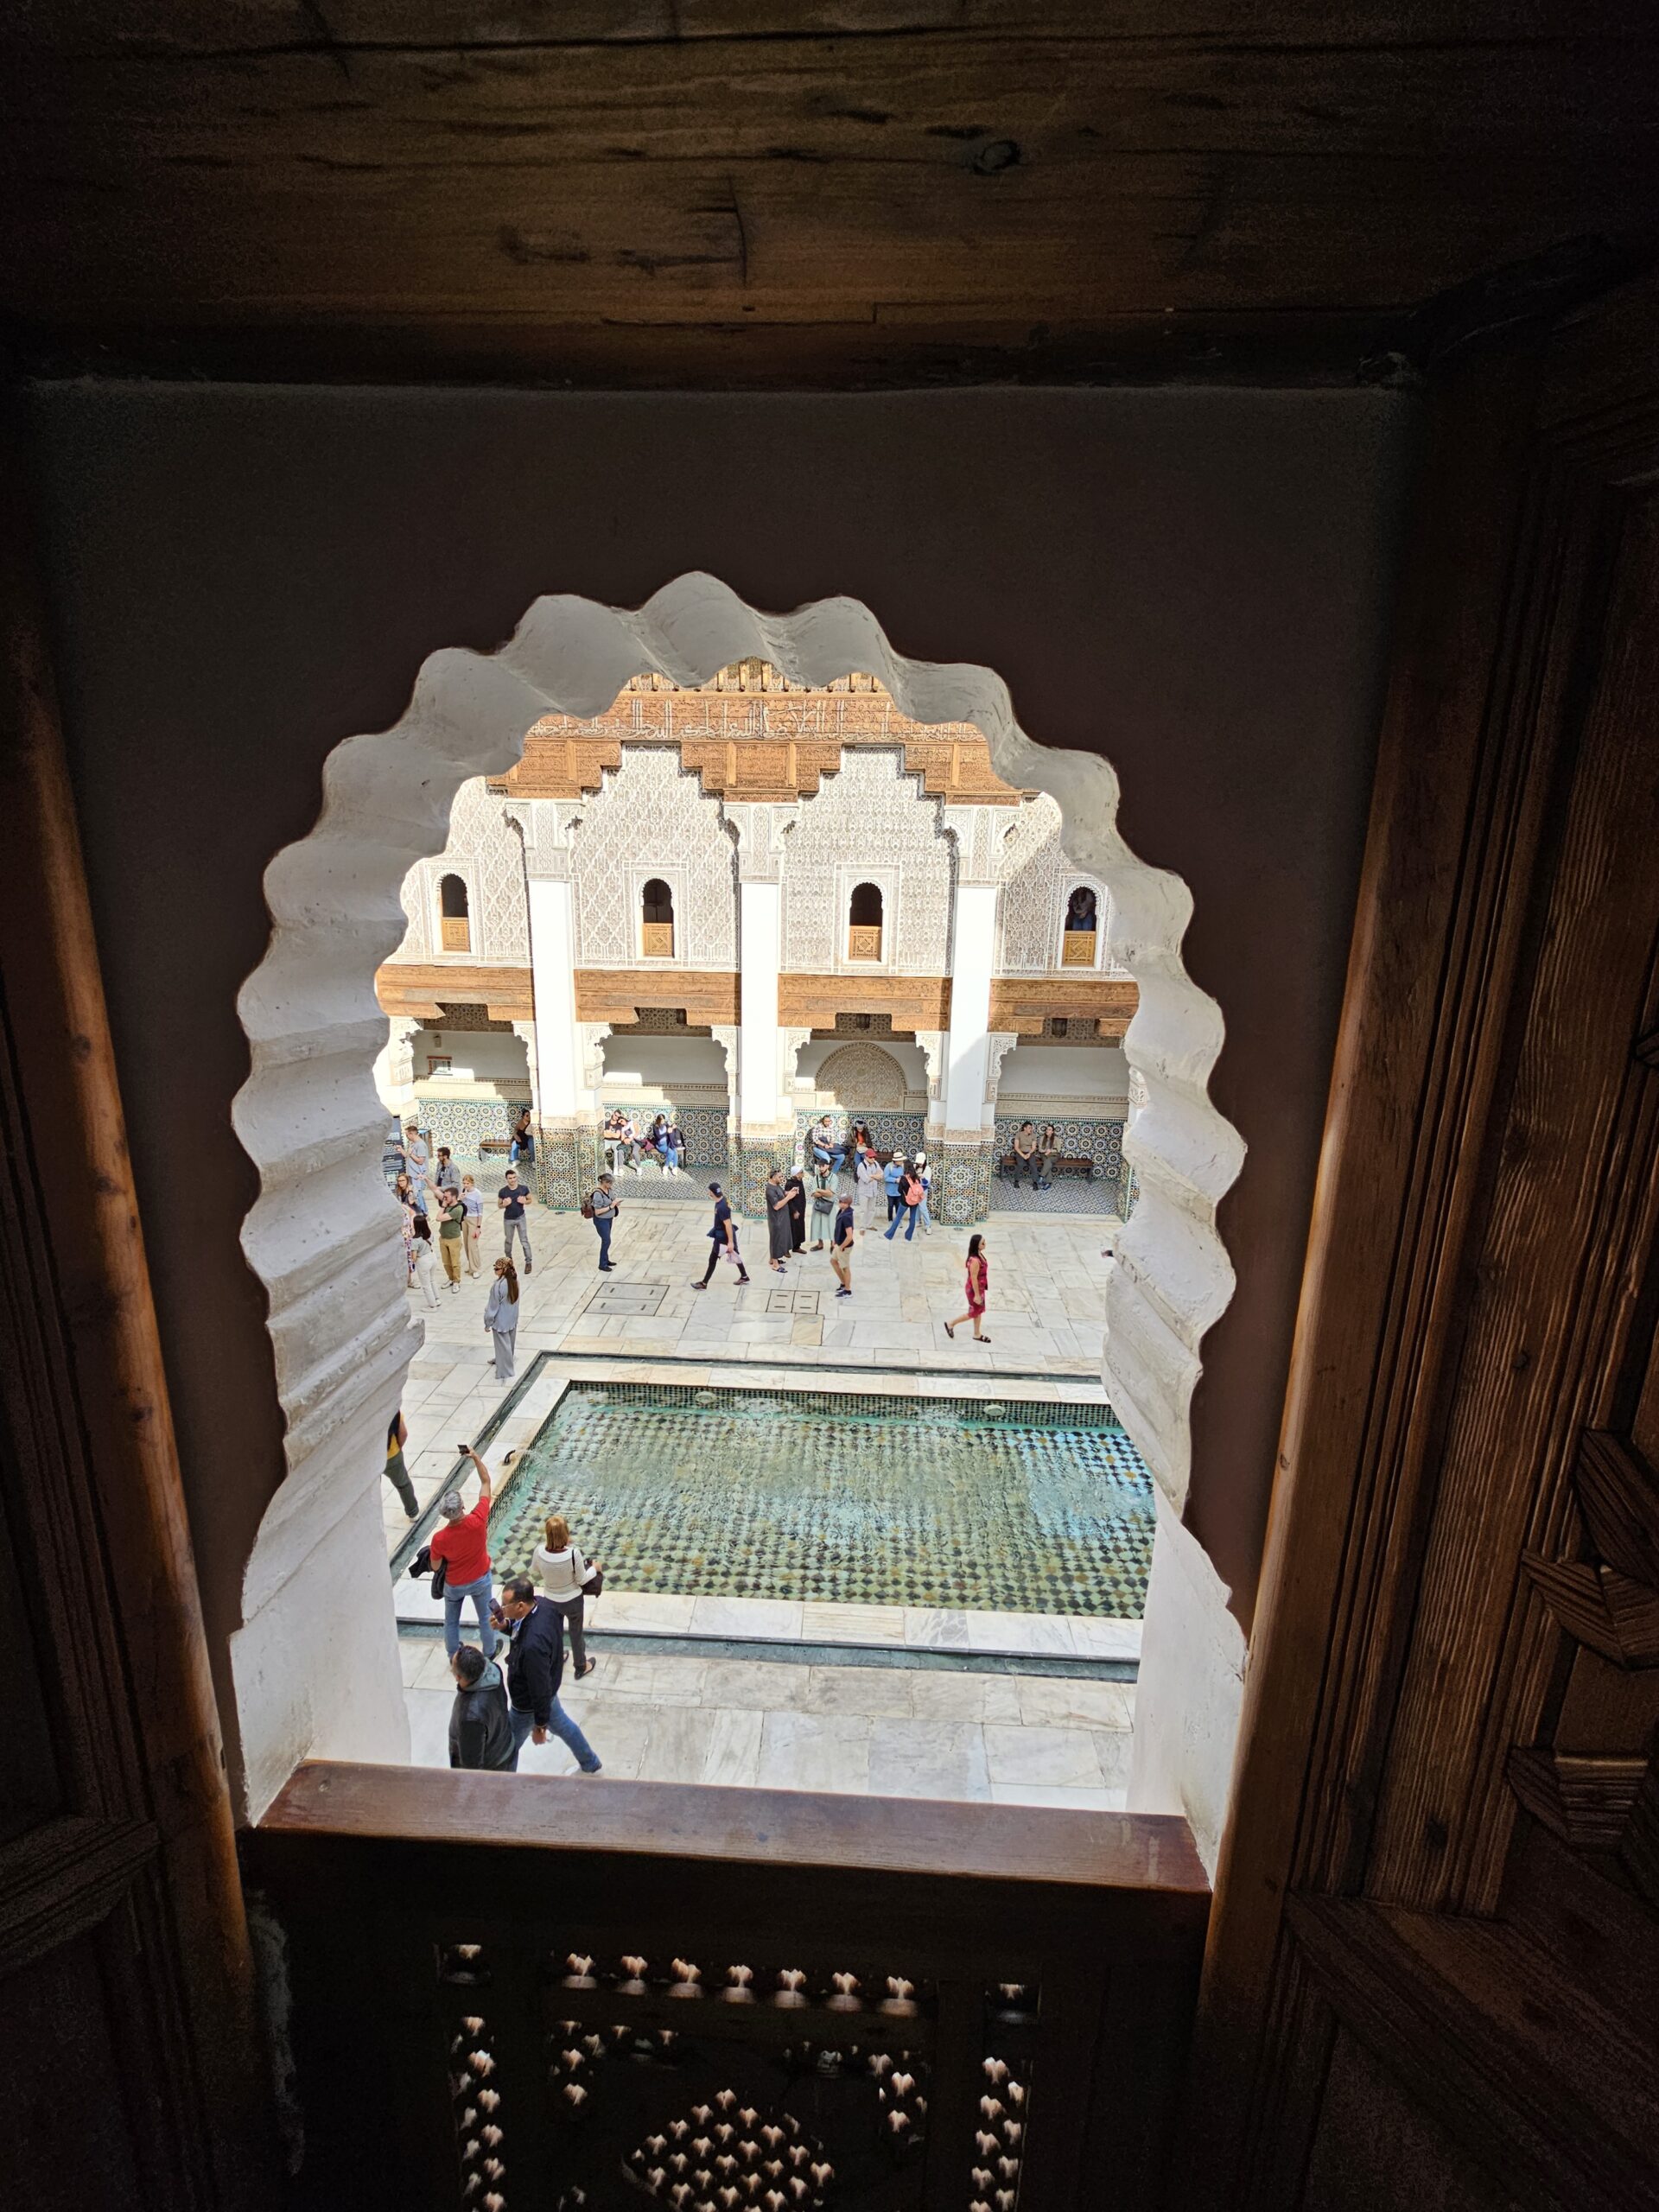 View of the central courtyard (riad) from a first floor window of Ben Youssef Madrasa. Image by 360onhistory.com